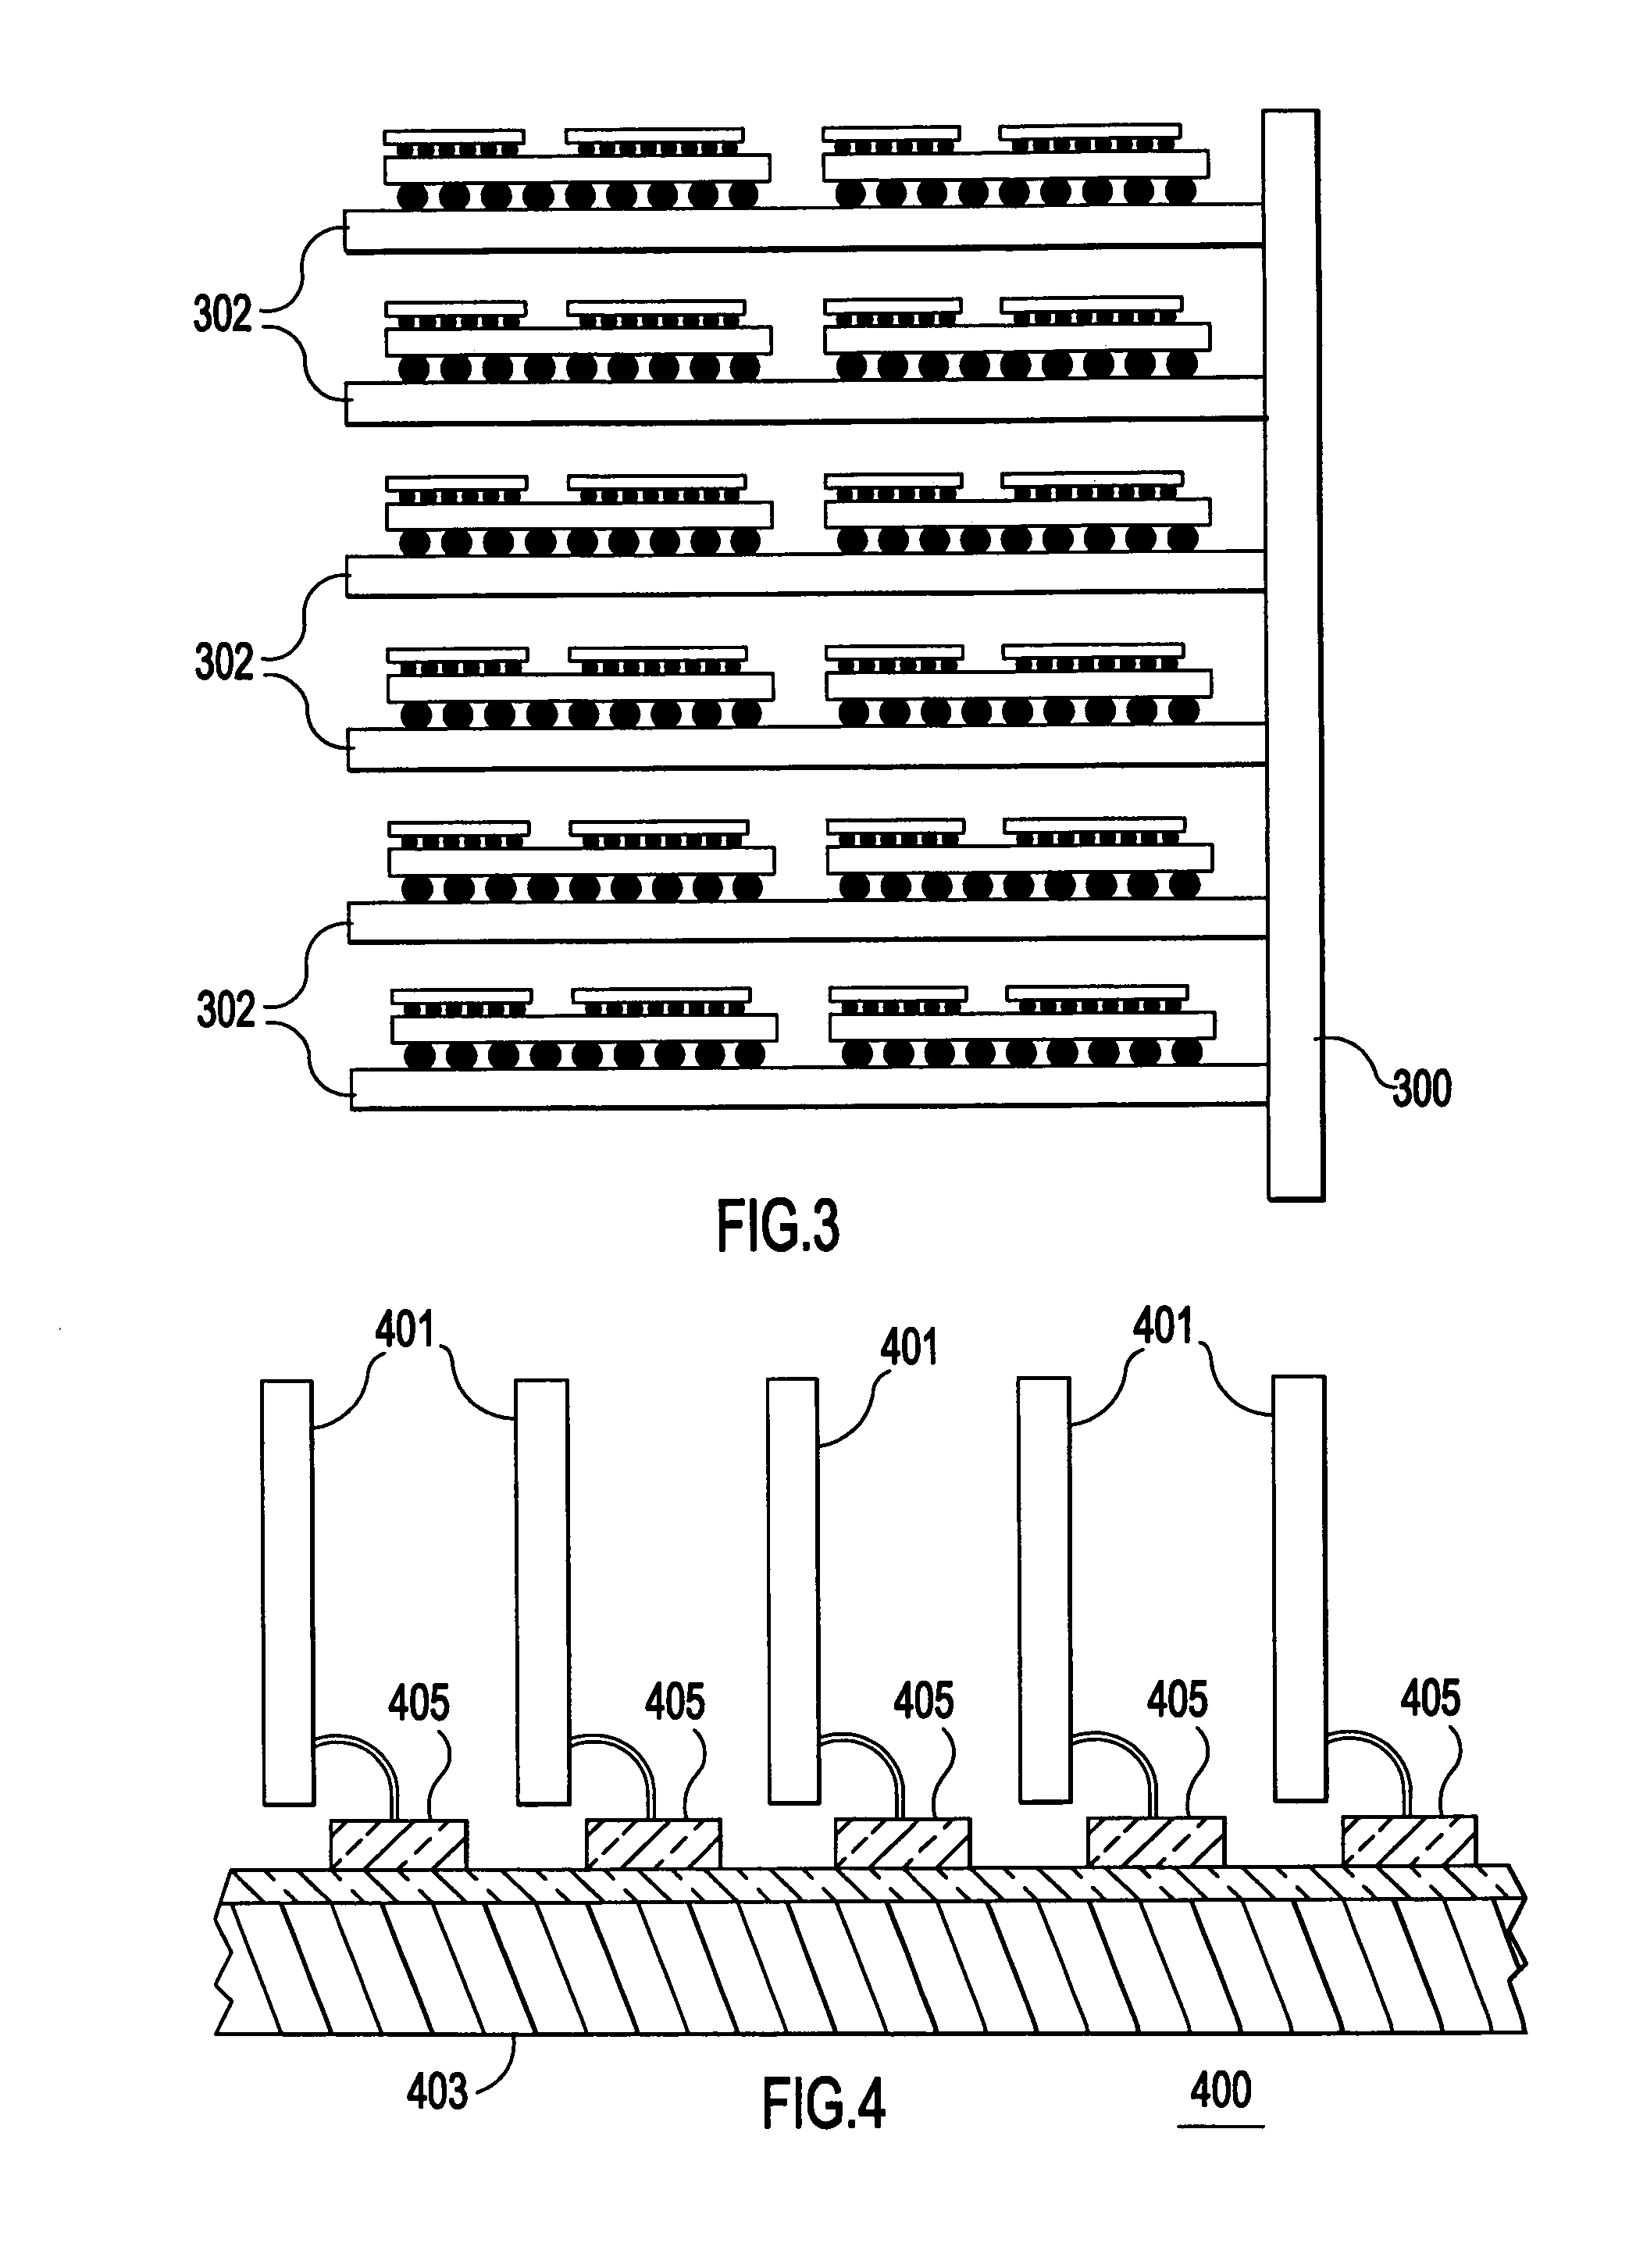 Backplane assembly with board to board optical interconnections